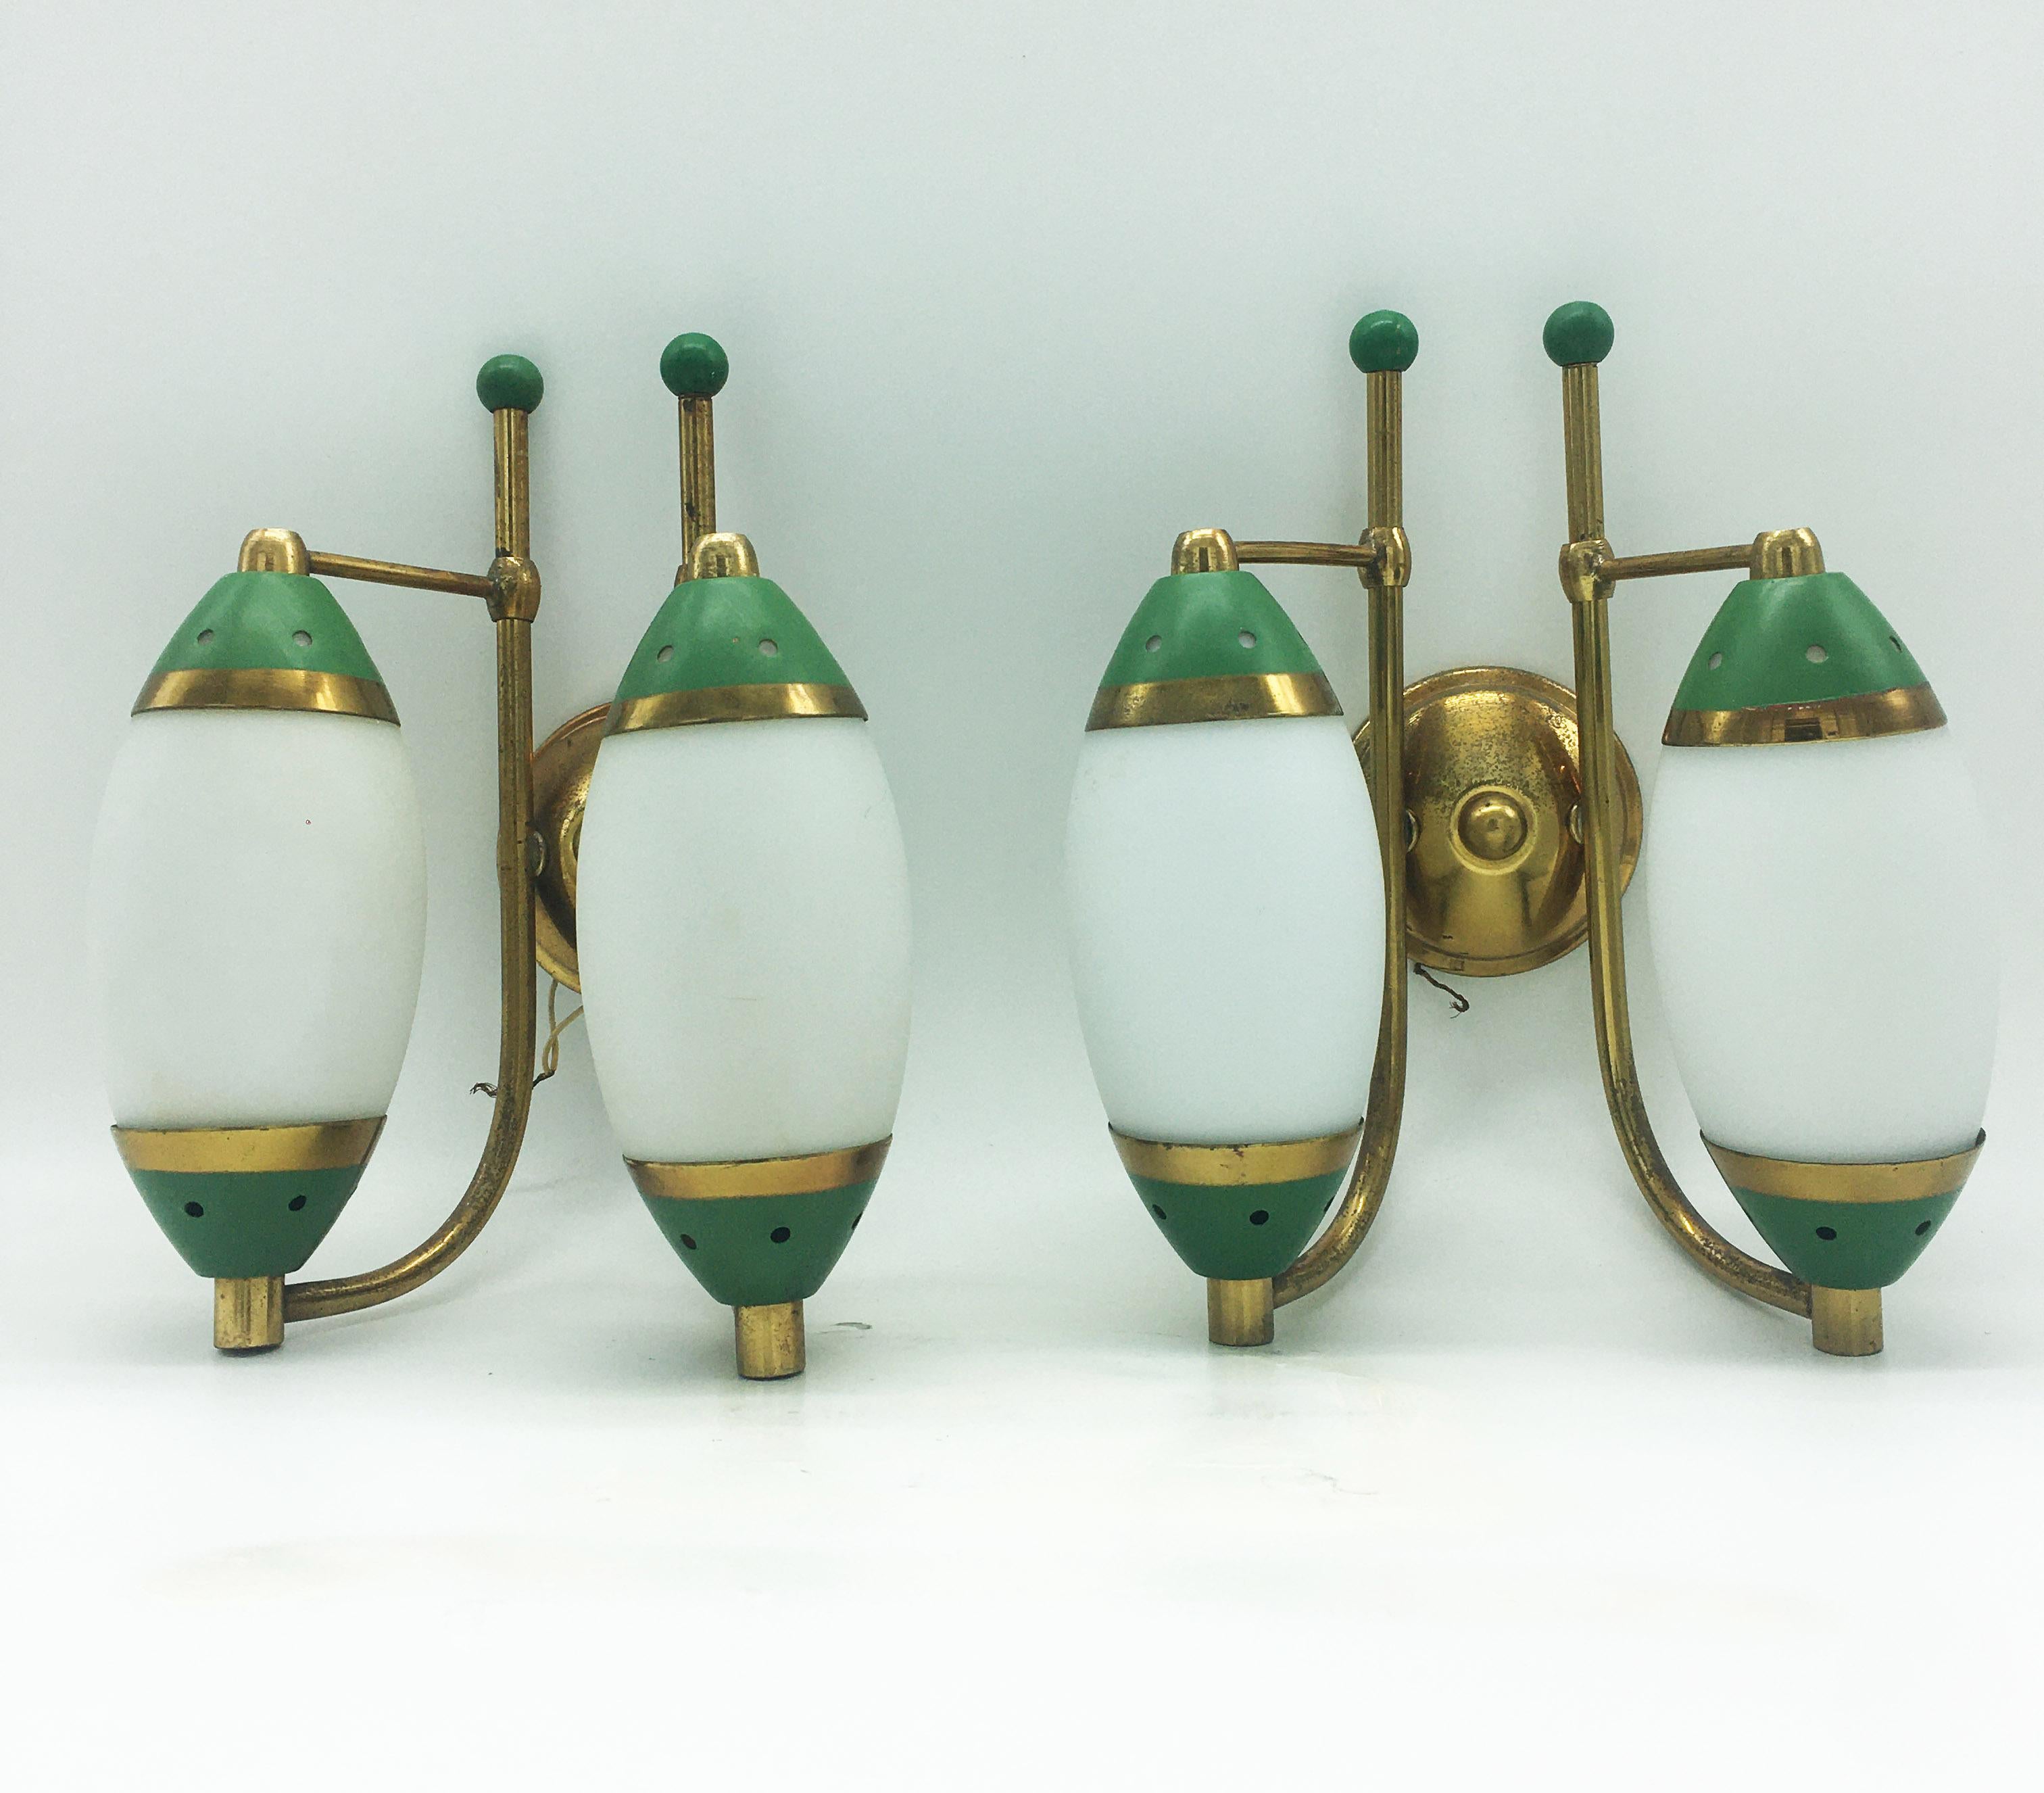 Italian design double-light wall lamp from the 1950s from the brand Stilnovo. Beautifully made with opaline glass and brass and finished with green details.